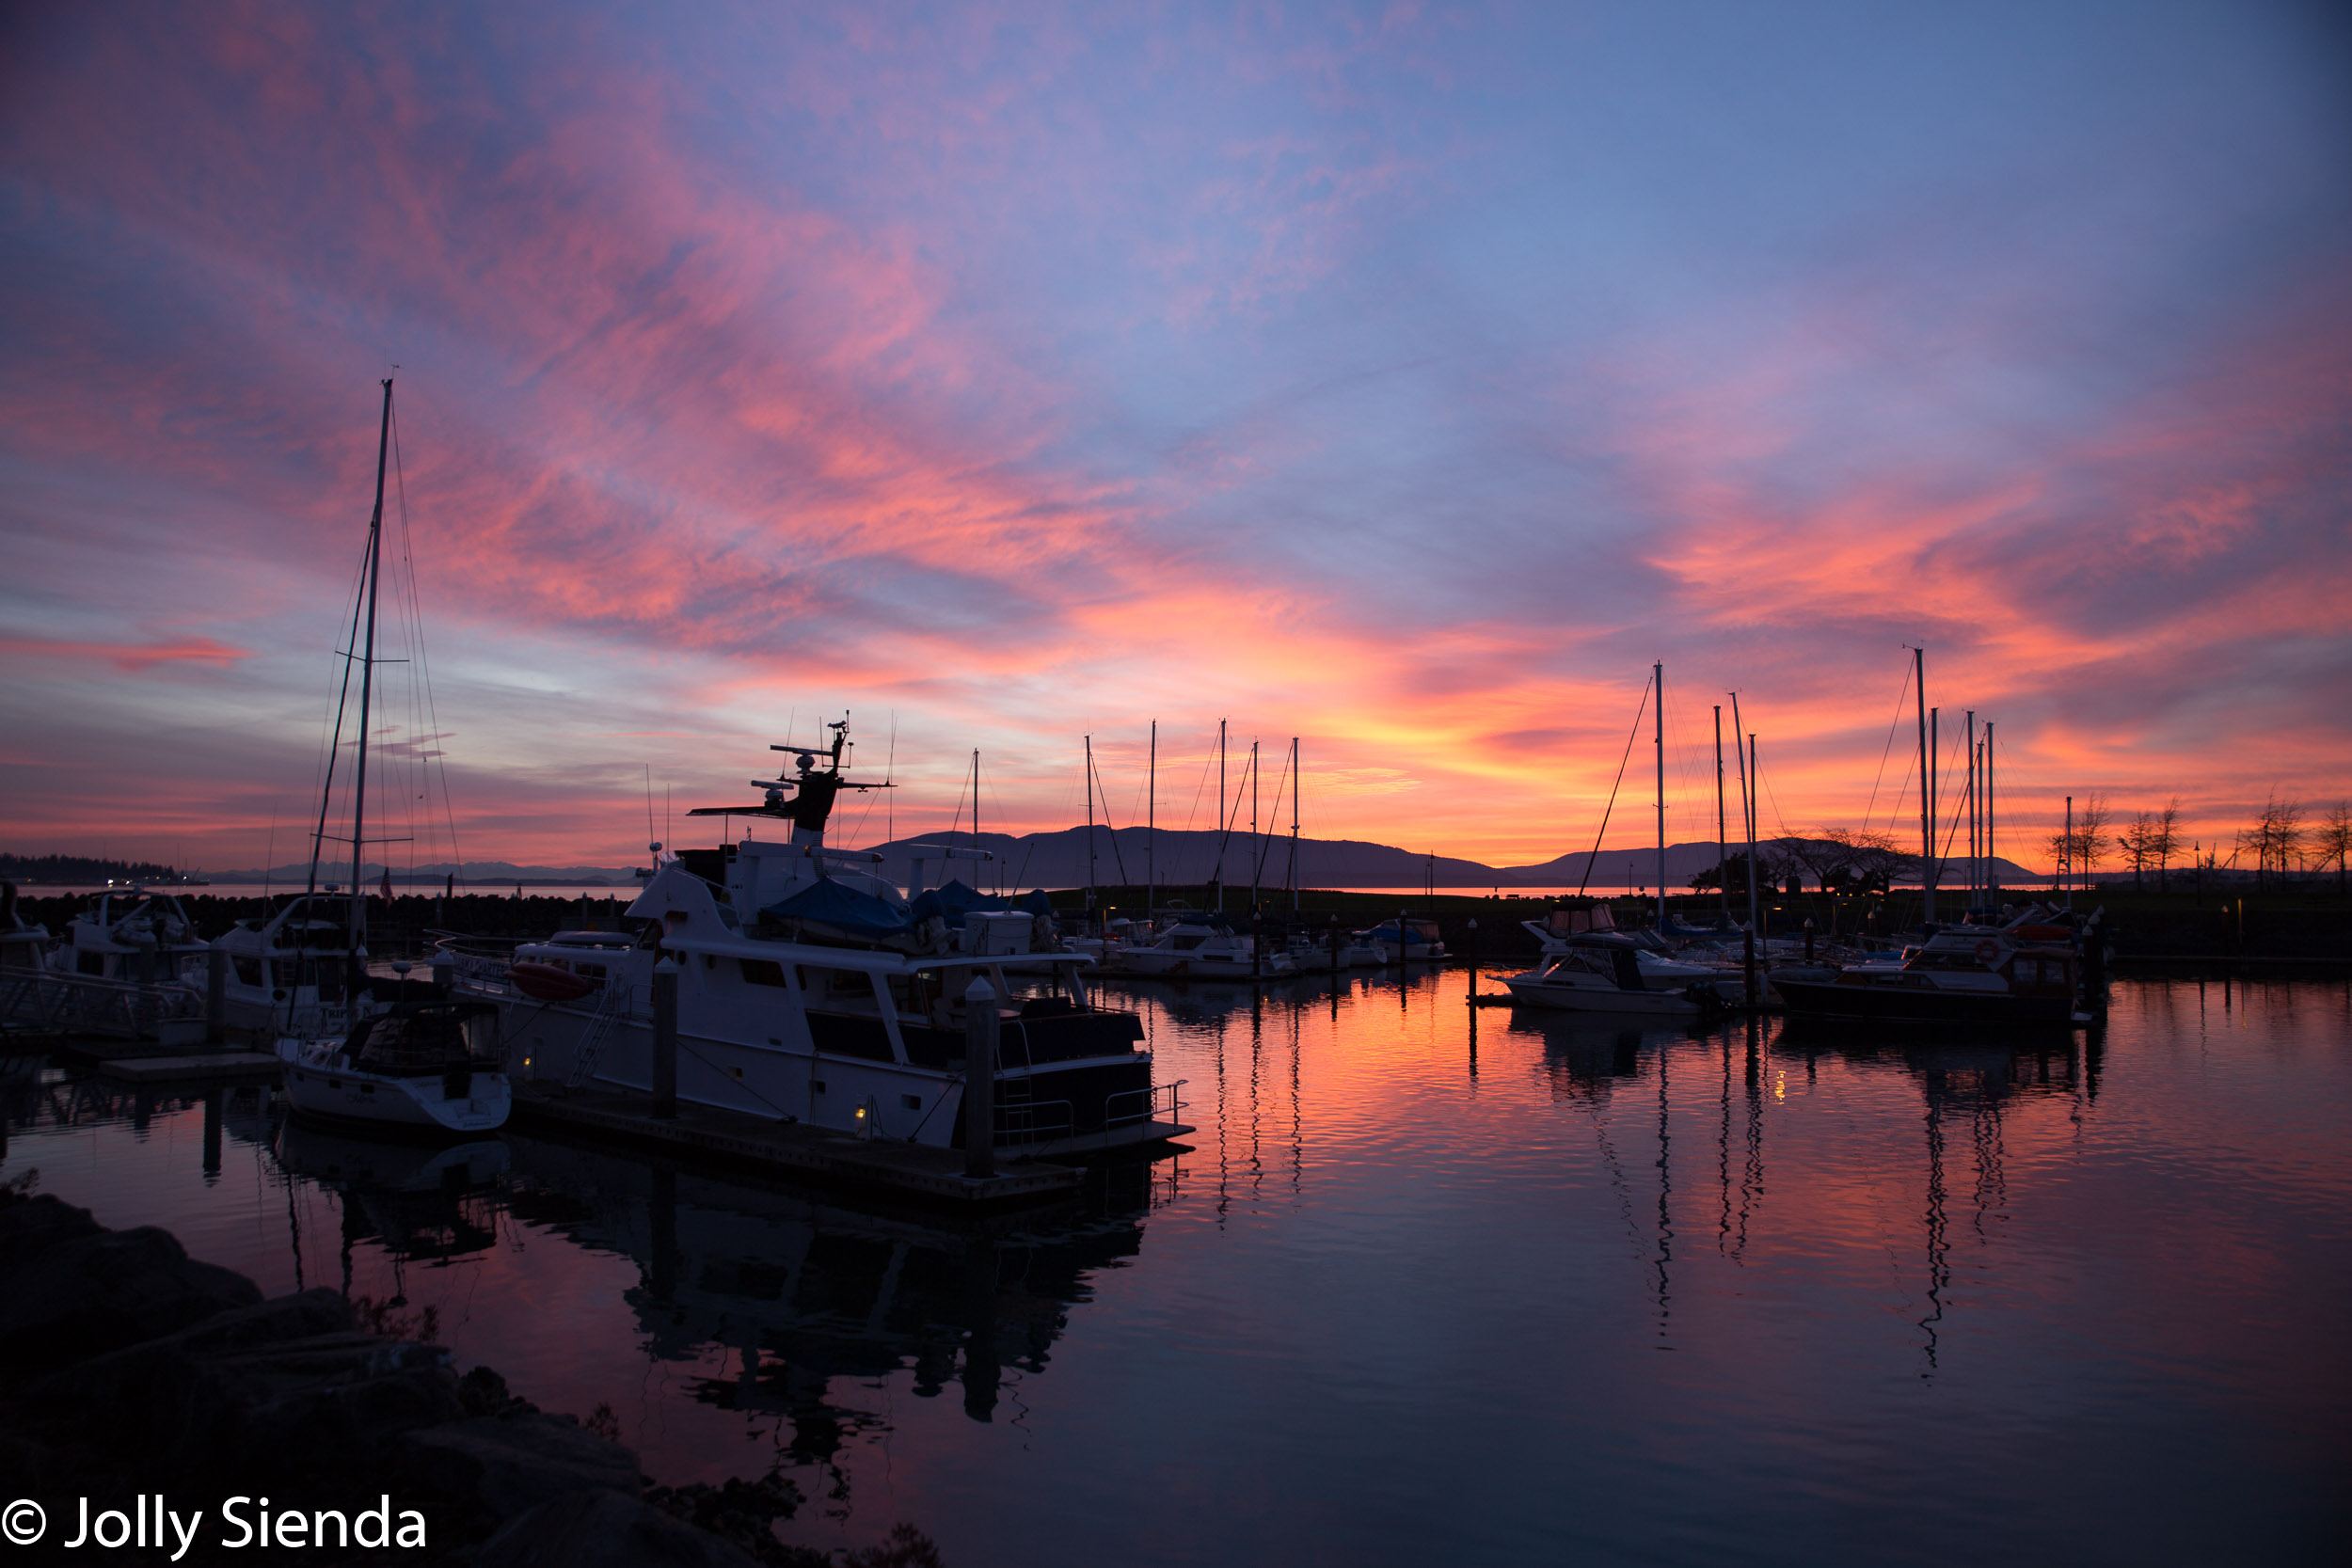 Pink sunset sets on a boat marina and Bellingham Bay